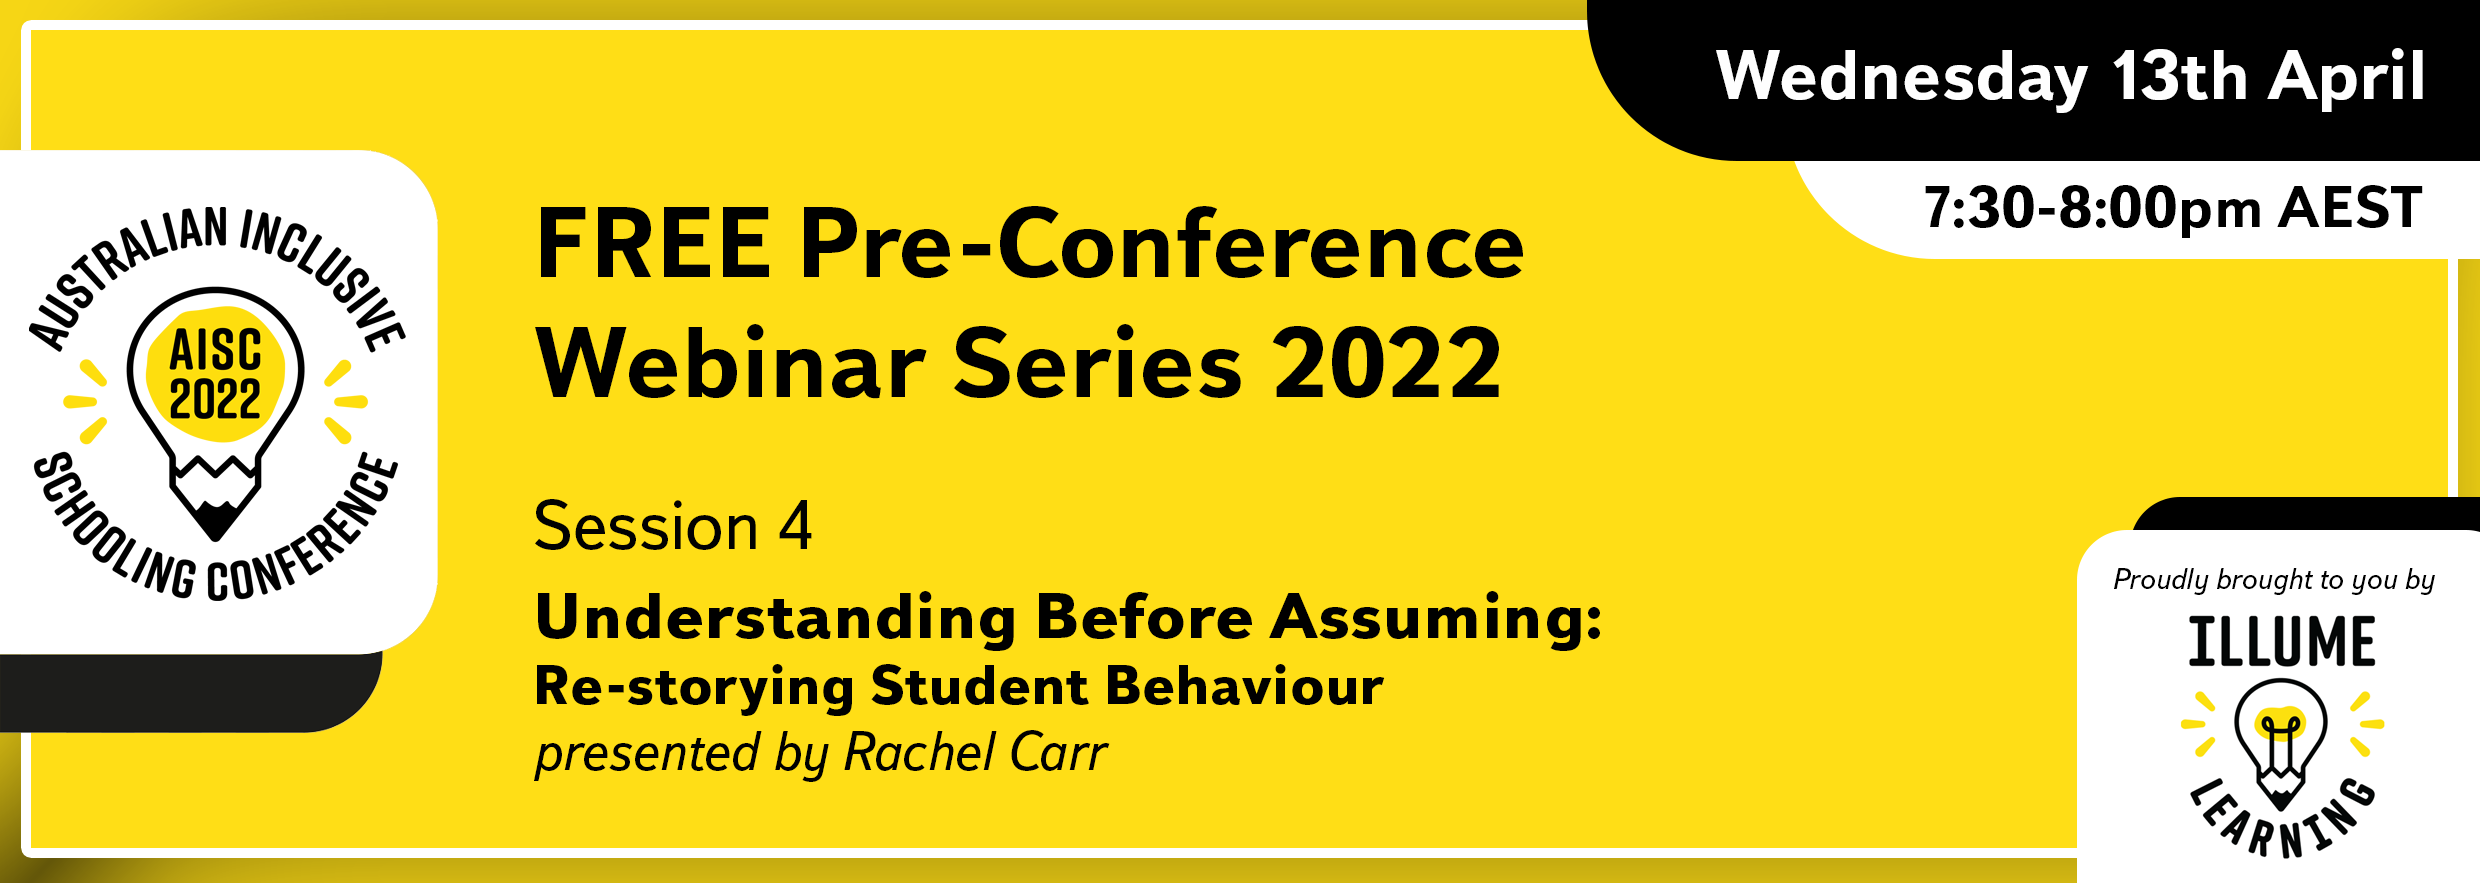 Image Description: Black text on a yellow background reads 'Australian Inclusive Schooling Conference, 'FREE Pre-conference Webinar Series 2022. Session 4. Understanding Before Assuming: Re-storying Student Behaviour. presented by Rachel Carr. Wednesday 13th April 7:30-8:00pm AEST. Proudly brought to you by Illume Learning'